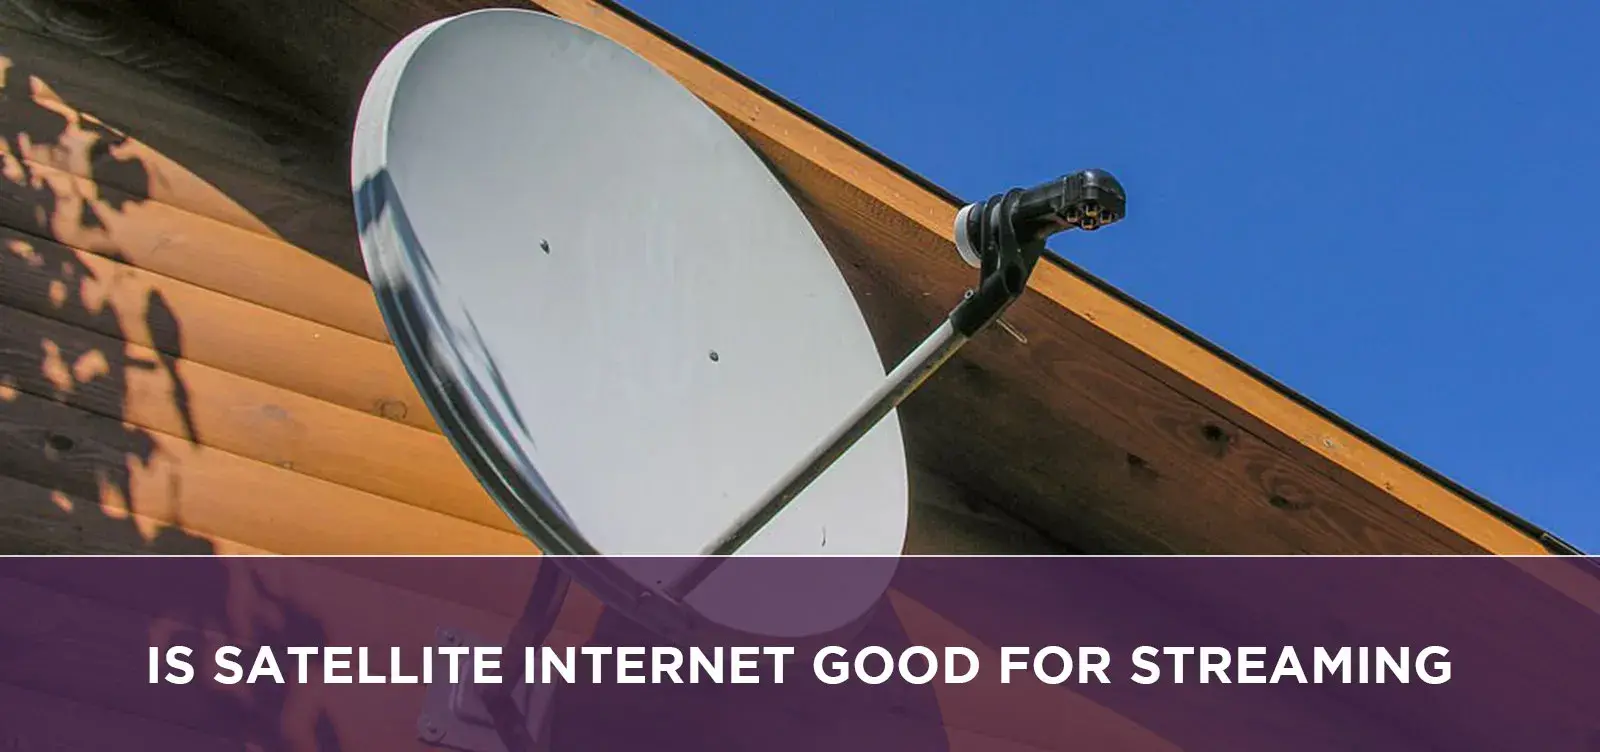 Is Satellite Internet Good For Streaming?